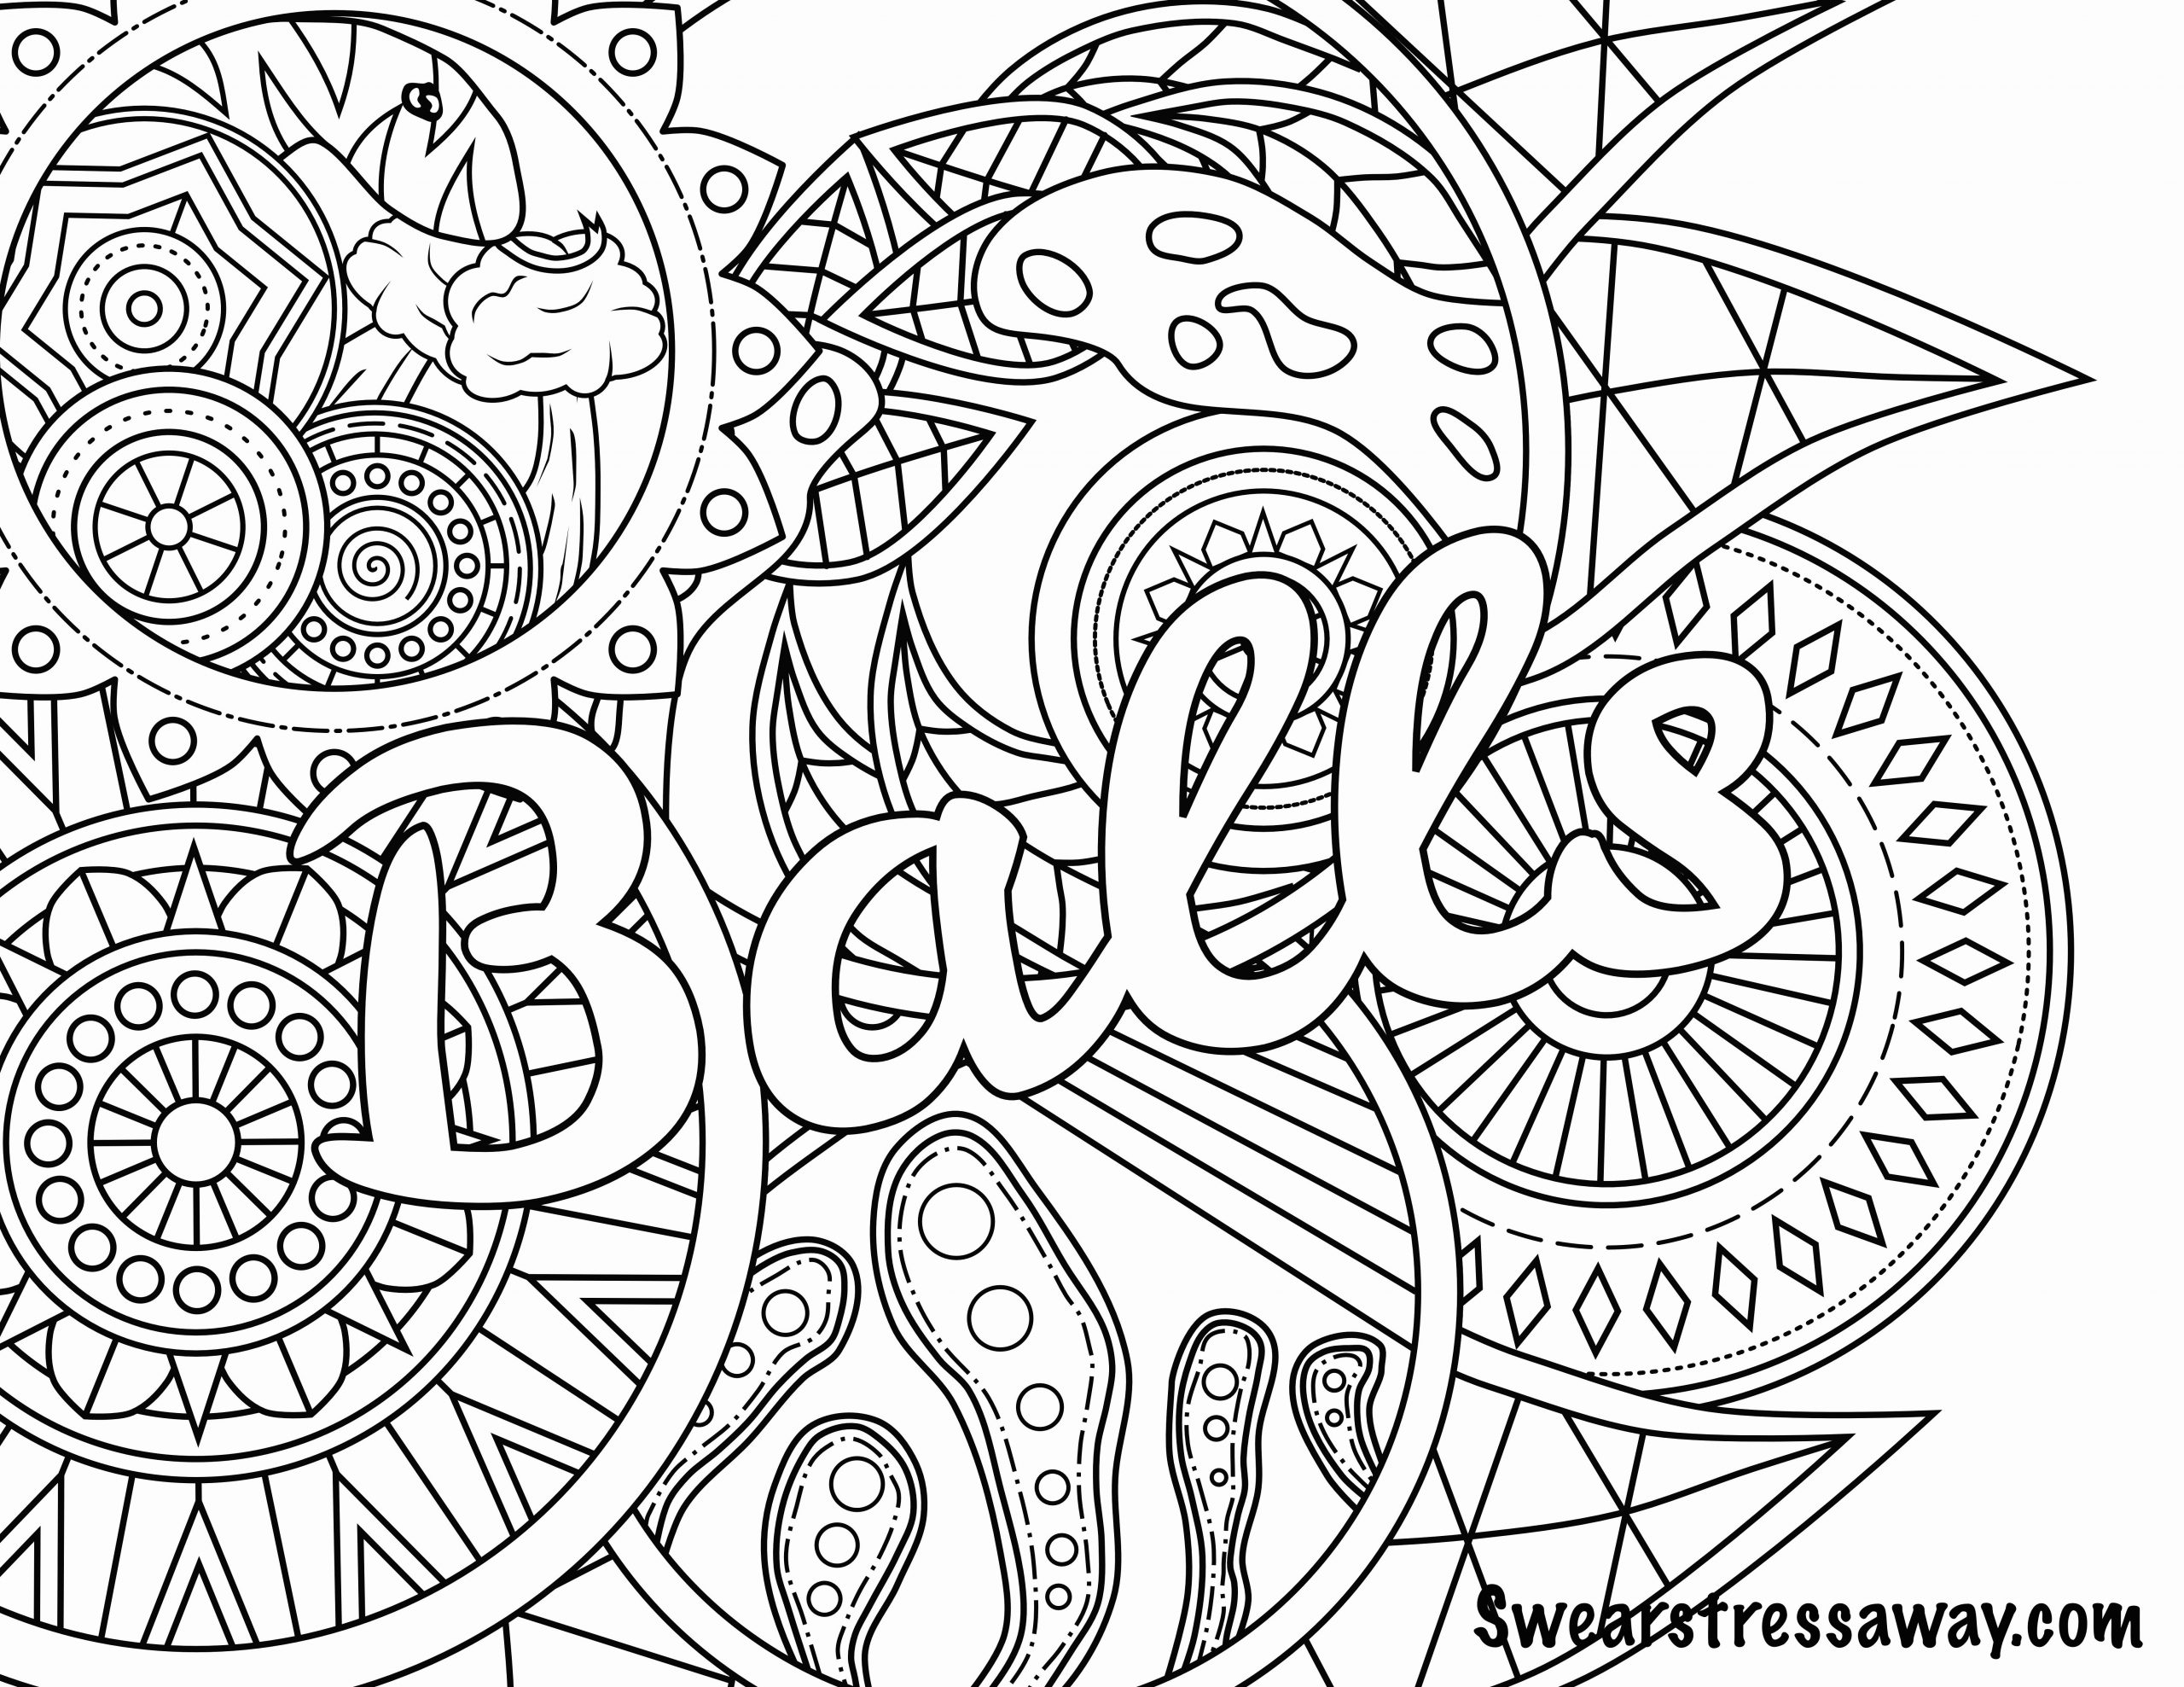 coloring pages : Awesome Adult Swear Coloringoks Picture Inspirations Pages  Swearingingok Best Word Printable App Free To Print Adults Chance The  Rapper Phenomenal Swearing Awesome Adult Swear Coloring Books Picture  Inspirations ~ mommaonamissioninc